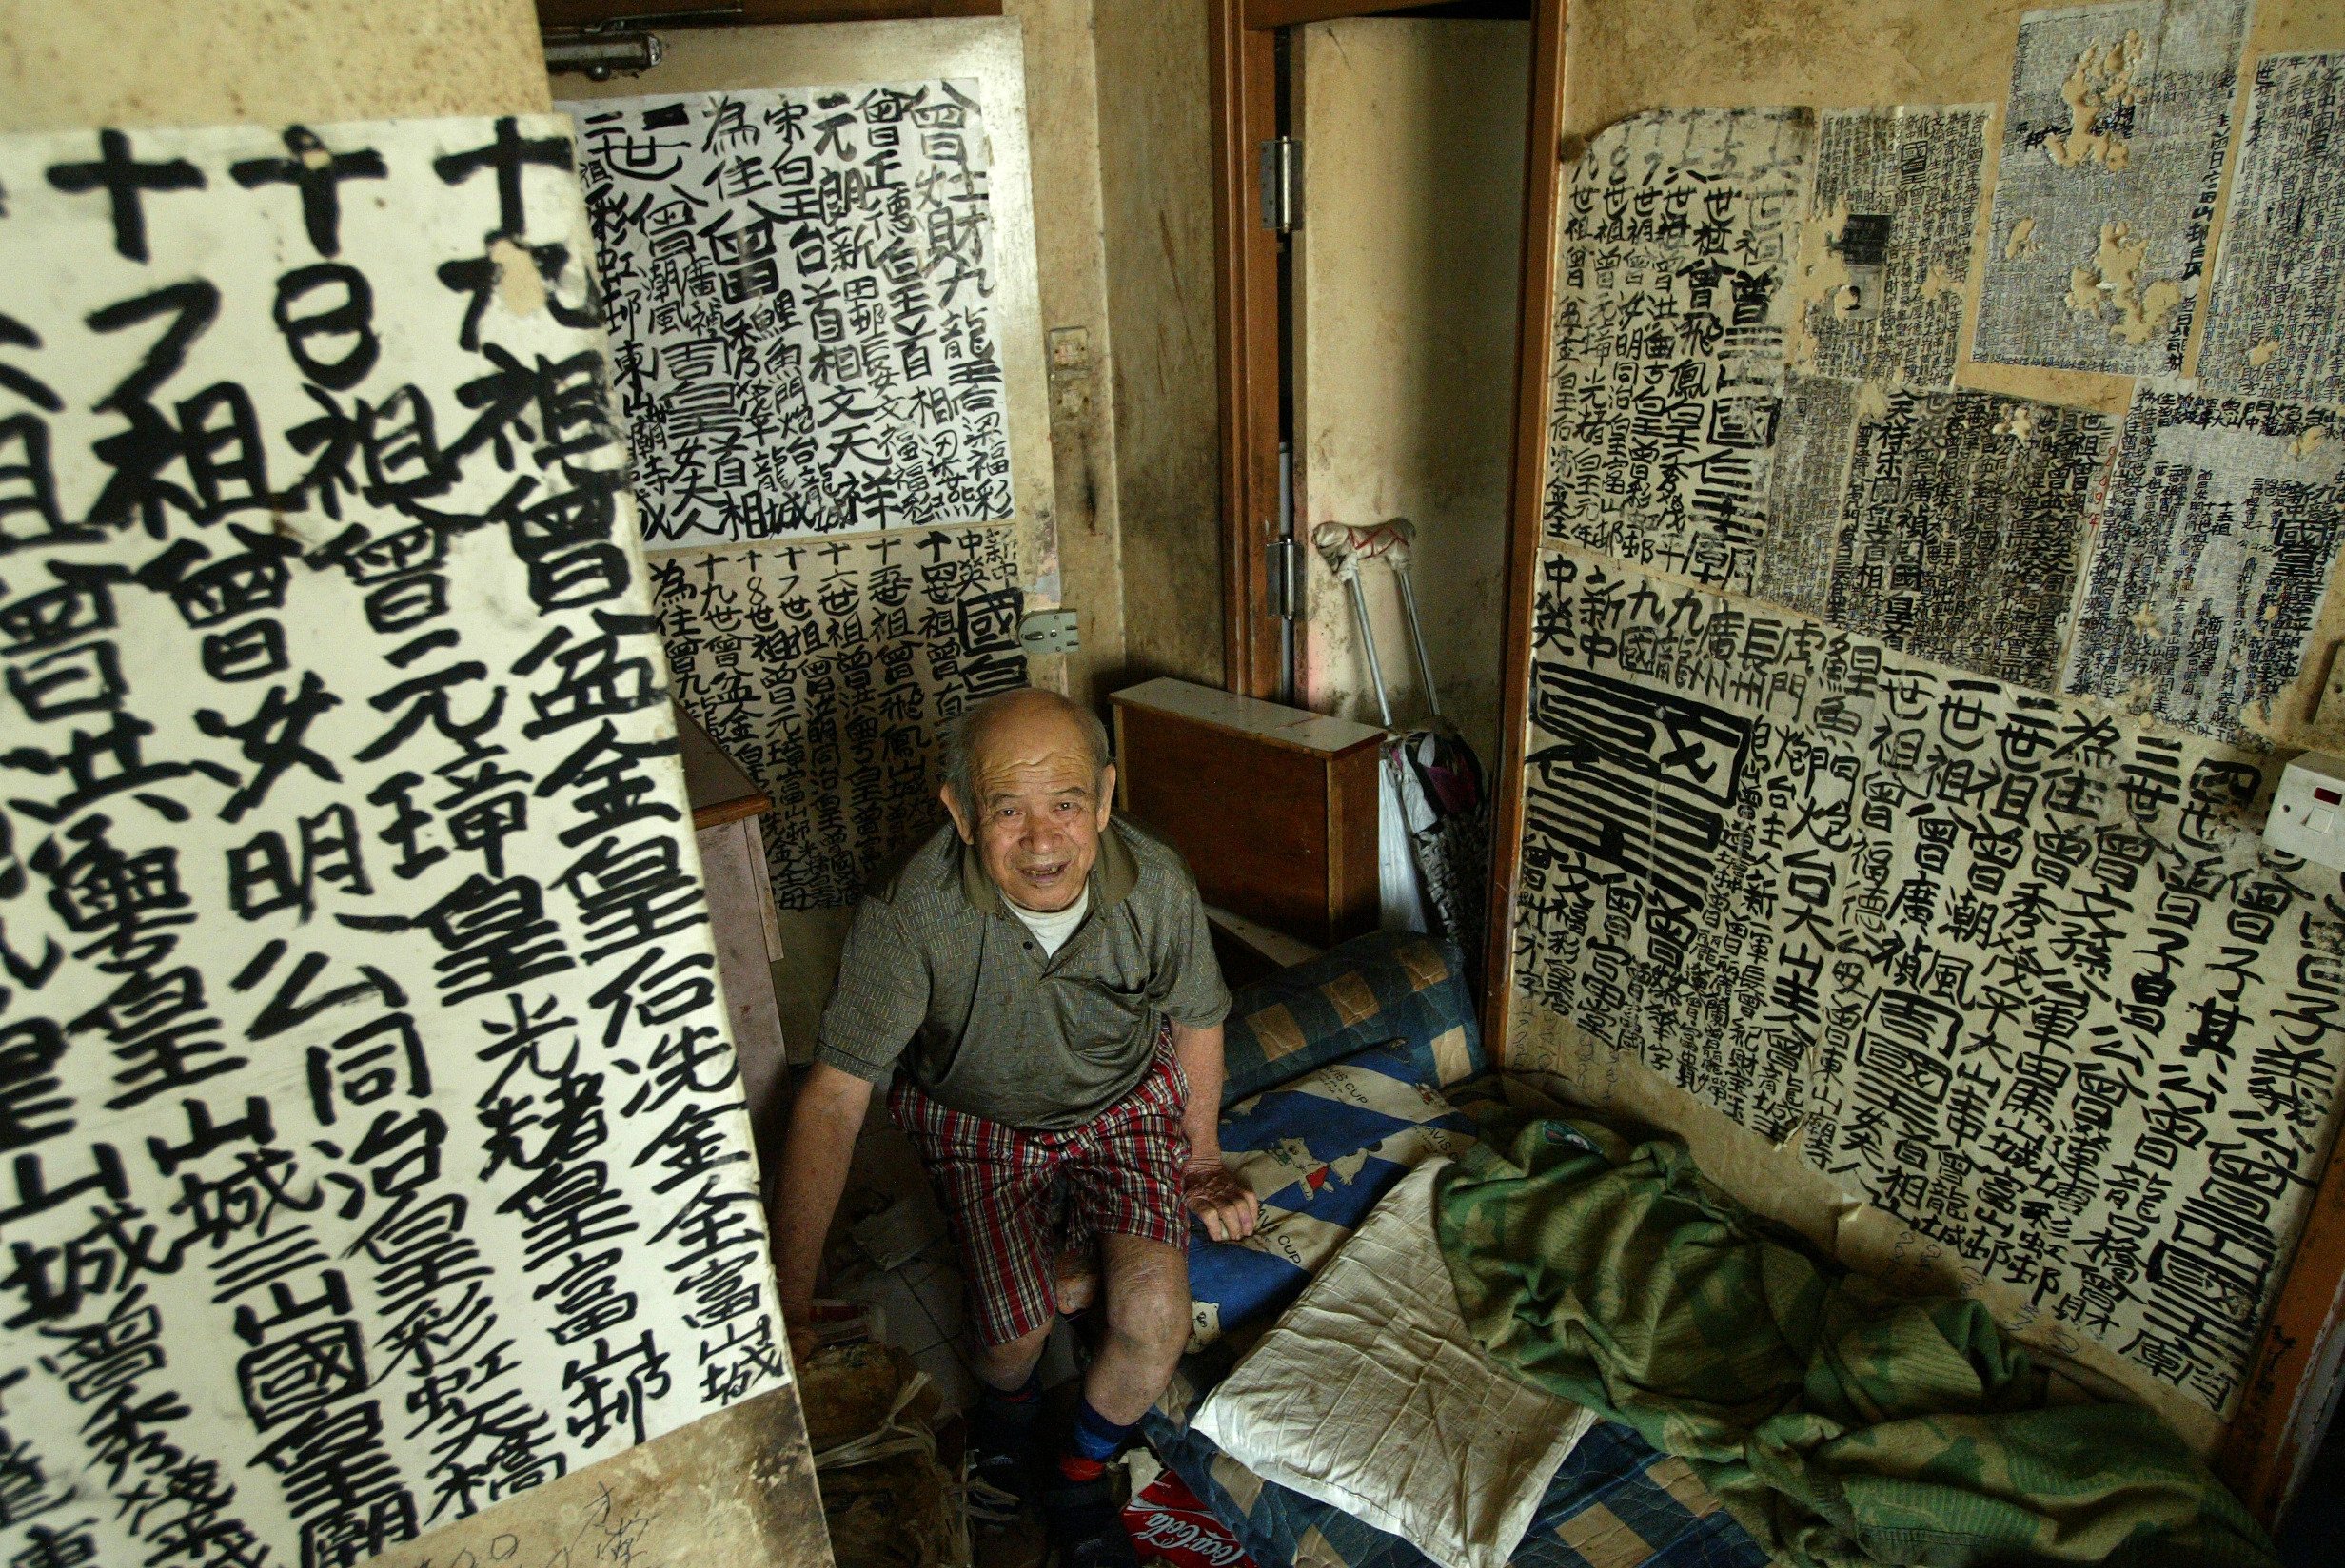 Graffiti painter Tsang Tsou-choi, better known as the King of Kowloon. Author Louisa Lim, in her new book Indelible City, calls him “a prism through which Hong Kong’s story could be viewed”. Photo: SCMP 